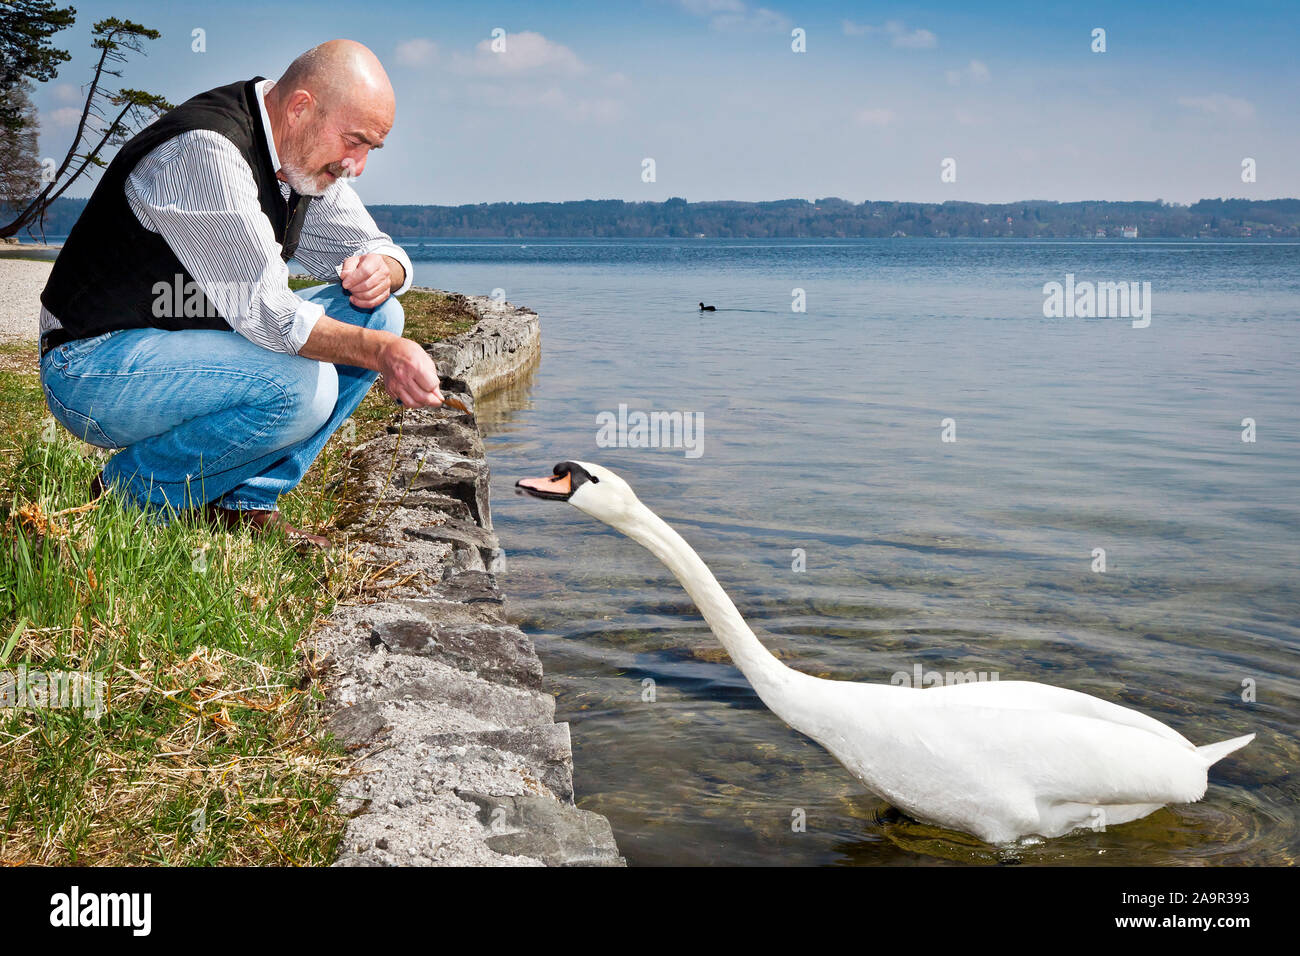 An old man with a grey beard is feeding a white swan at the lake Starnberg in Germany Stock Photo